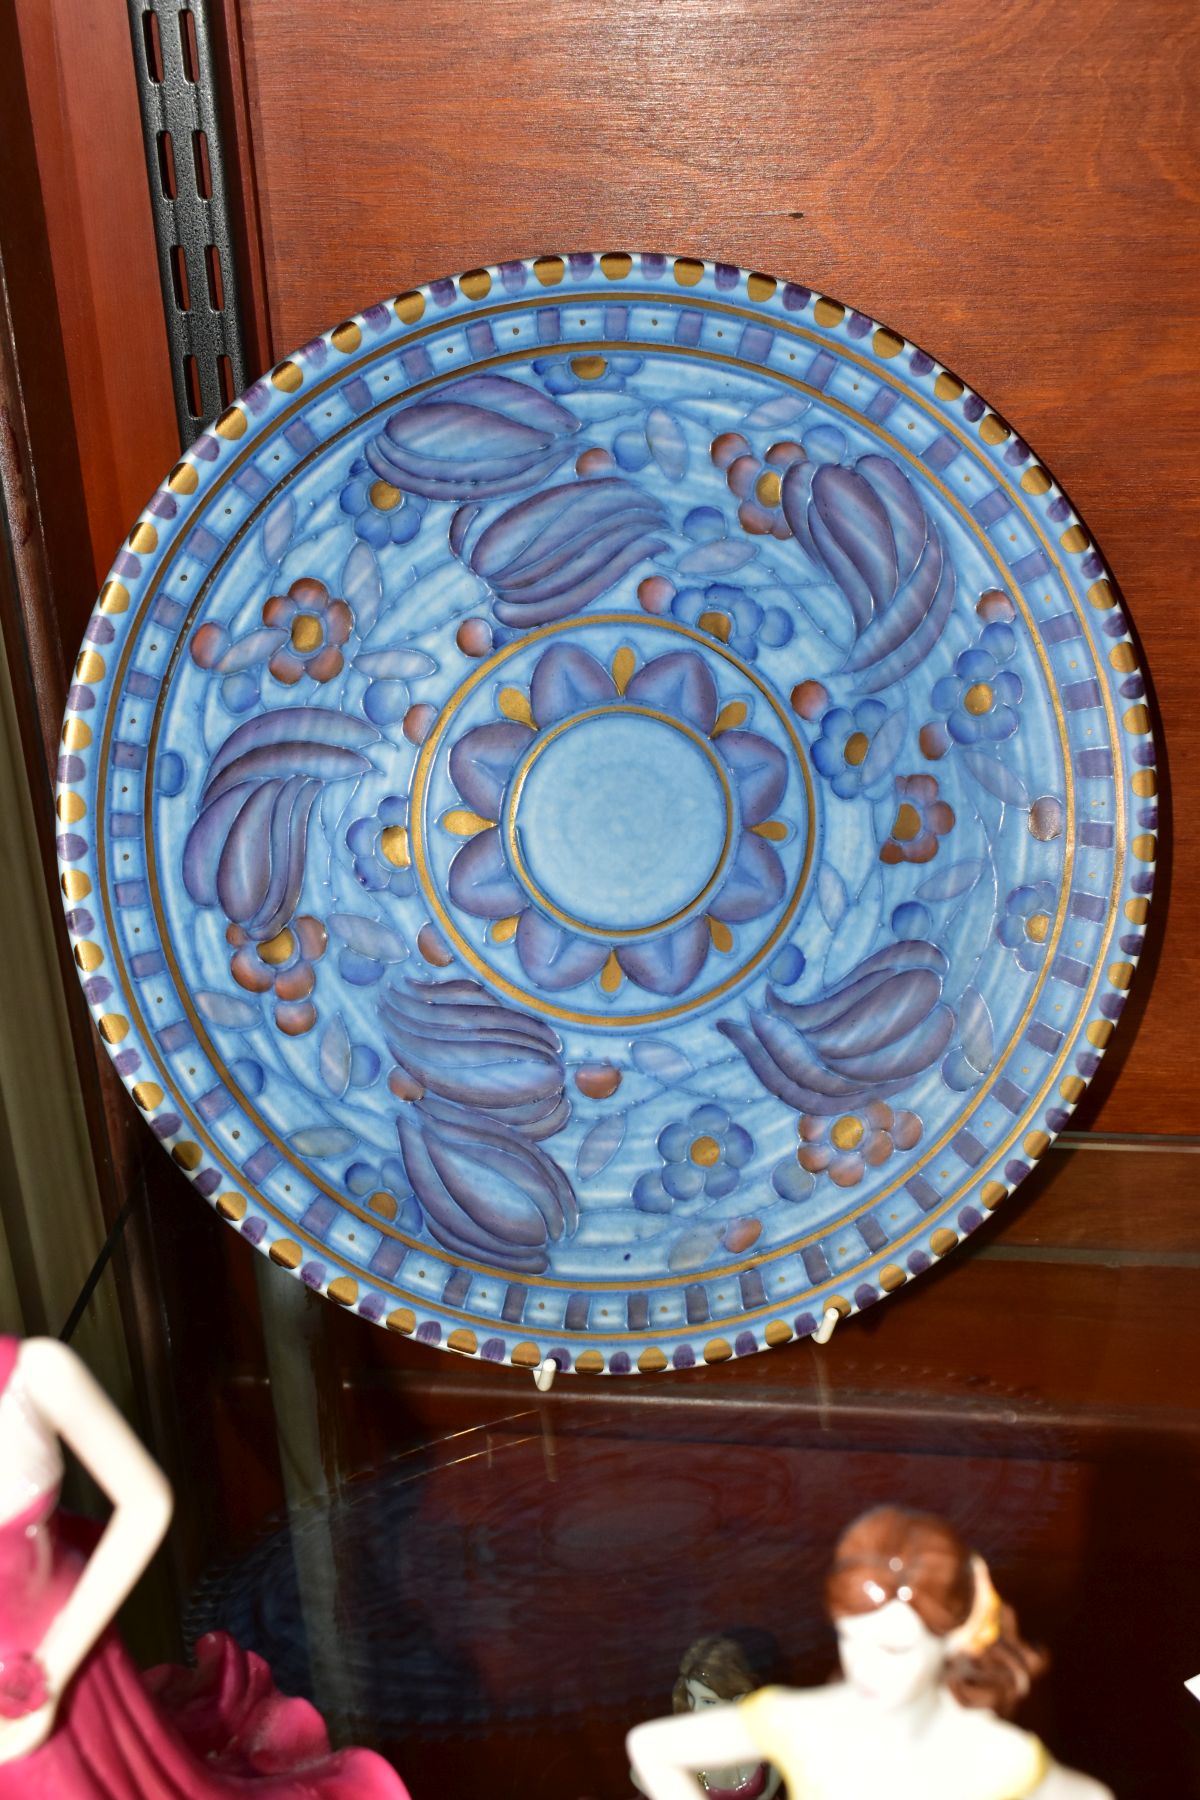 A CHARLOTTE RHEAD FOR CROWN DUCAL CHARGER, Kashmir/Blue Tulips pattern No 4794, Crown Ducal